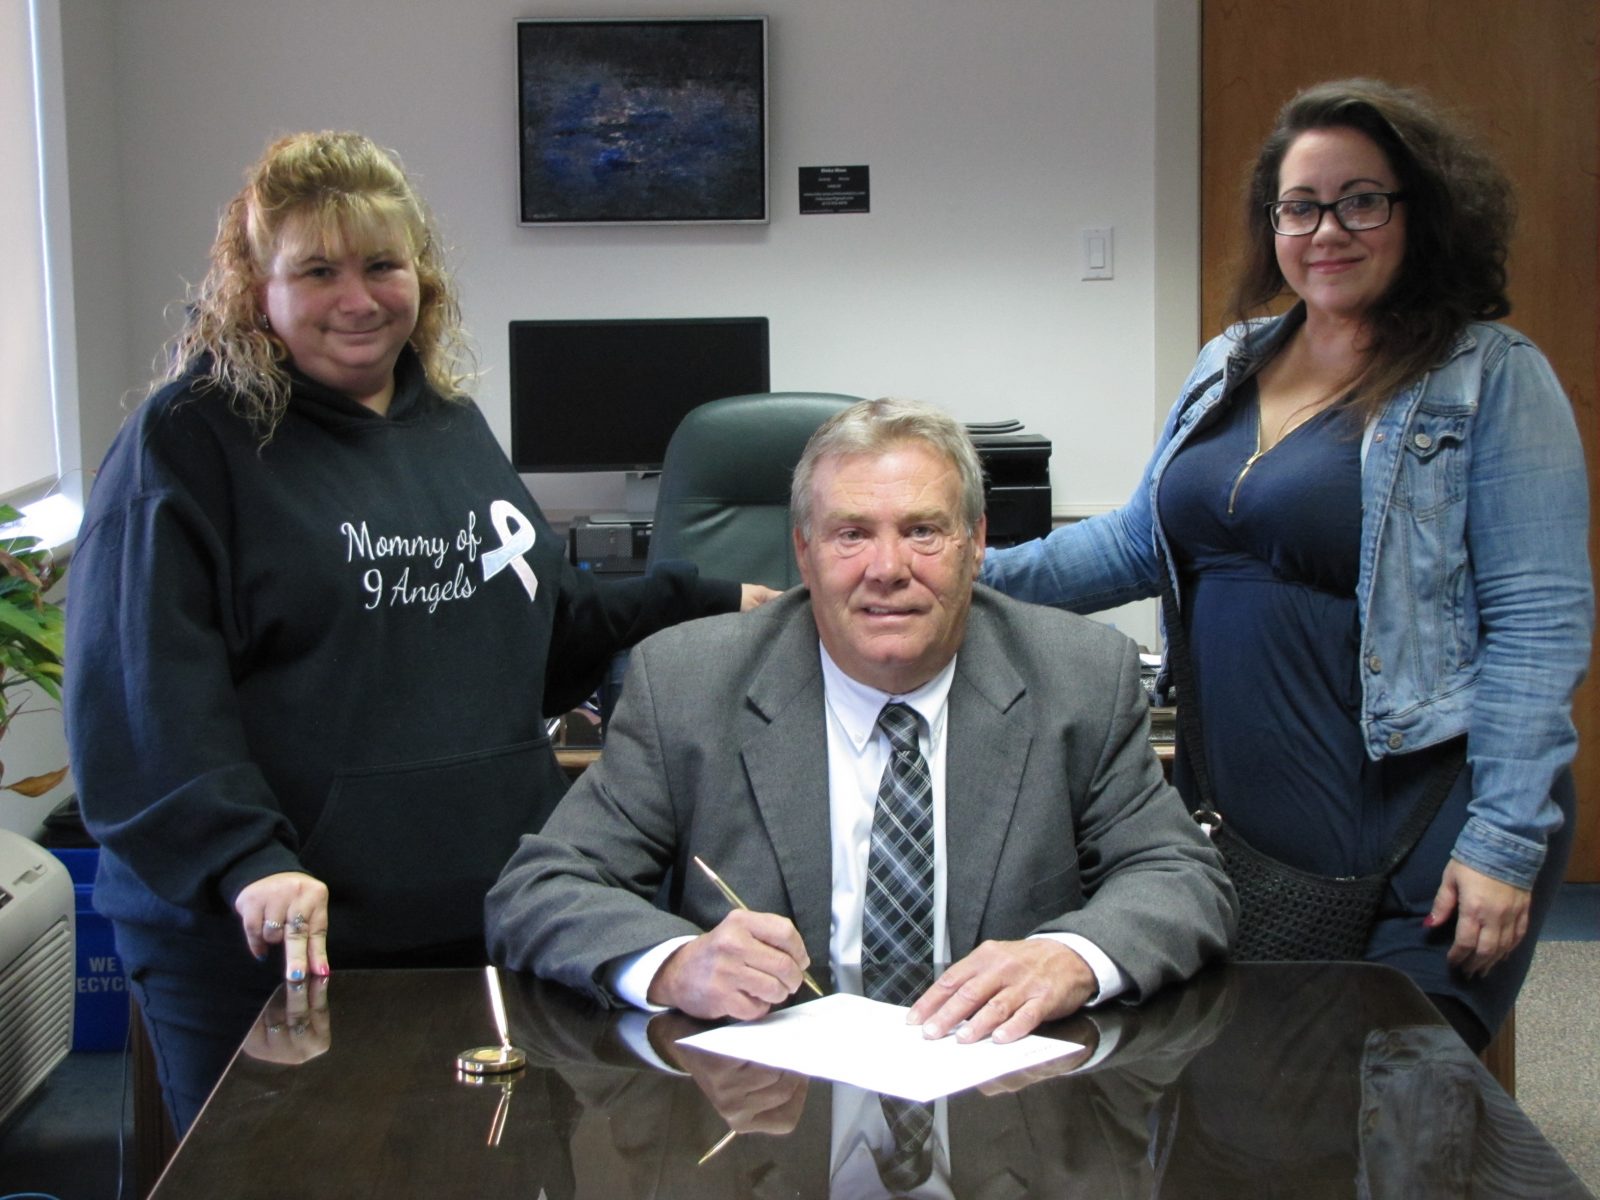 Mayor proclaims October 15 Pregnancy and Infancy Loss Awareness Day